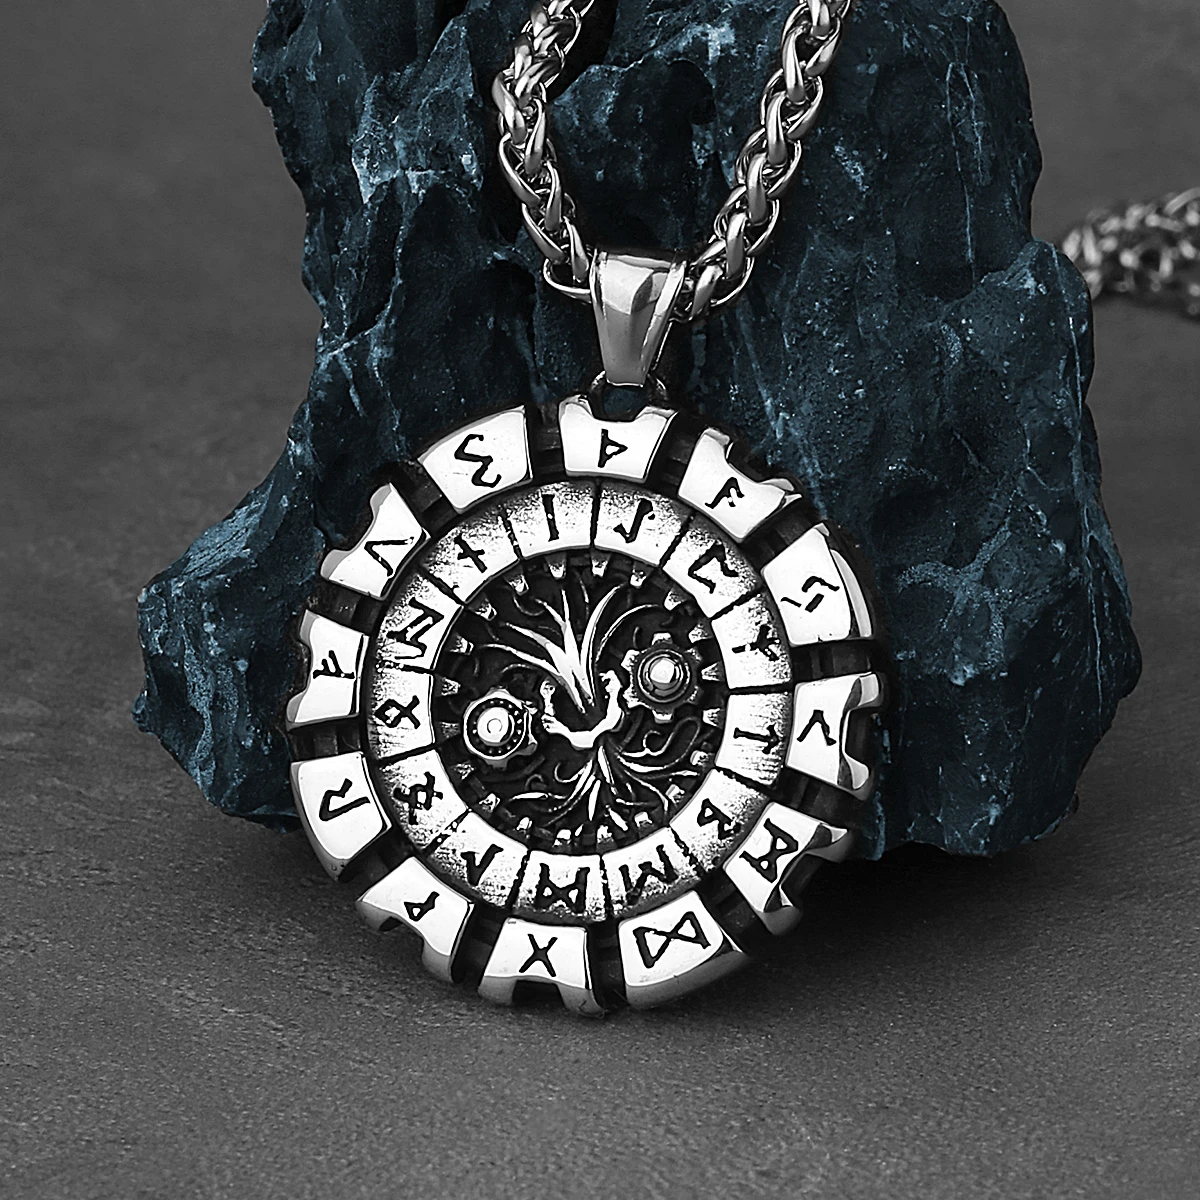 

Stainless Steel Viking Tree of Life and Odin Rune Necklace Men's Vintage Fashion Statement Necklace Pendant Viking Jewelry Gift